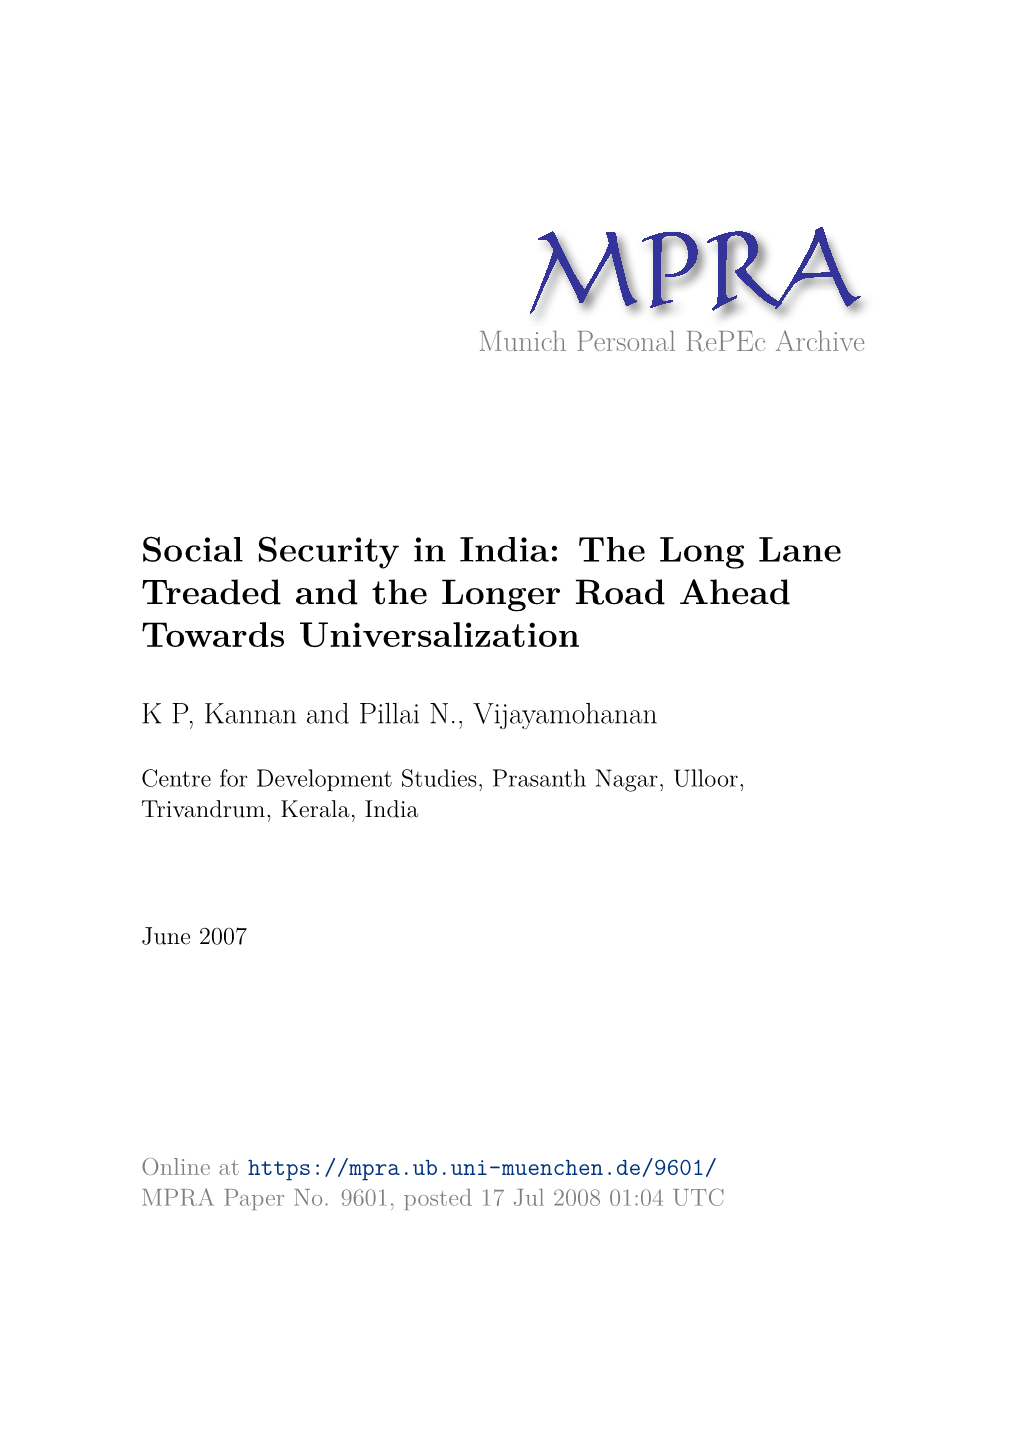 Social Security in India: the Long Lane Treaded and the Longer Road Ahead Towards Universalization